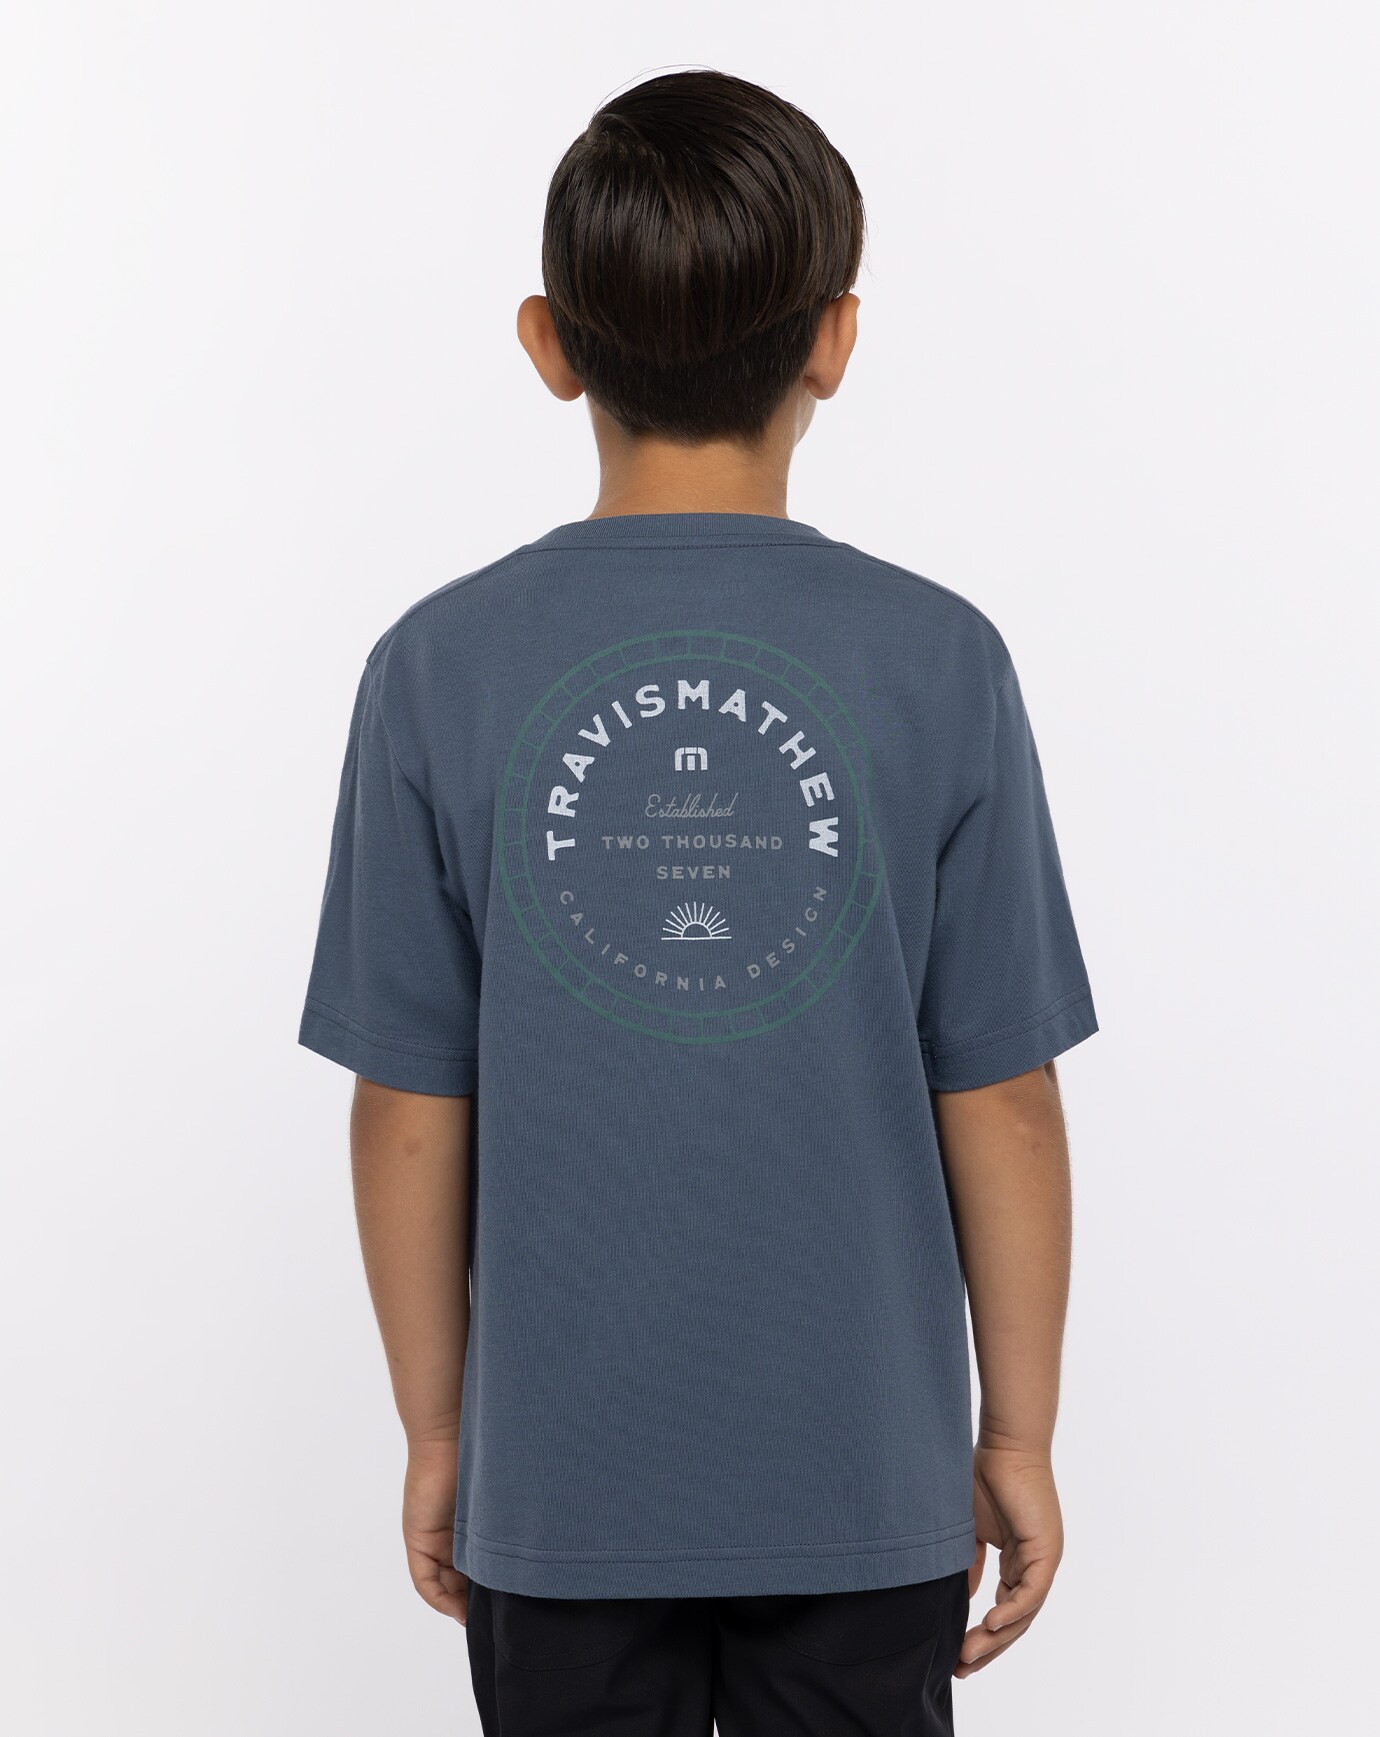 ROUGHING IT YOUTH T-SHIRT Image 3